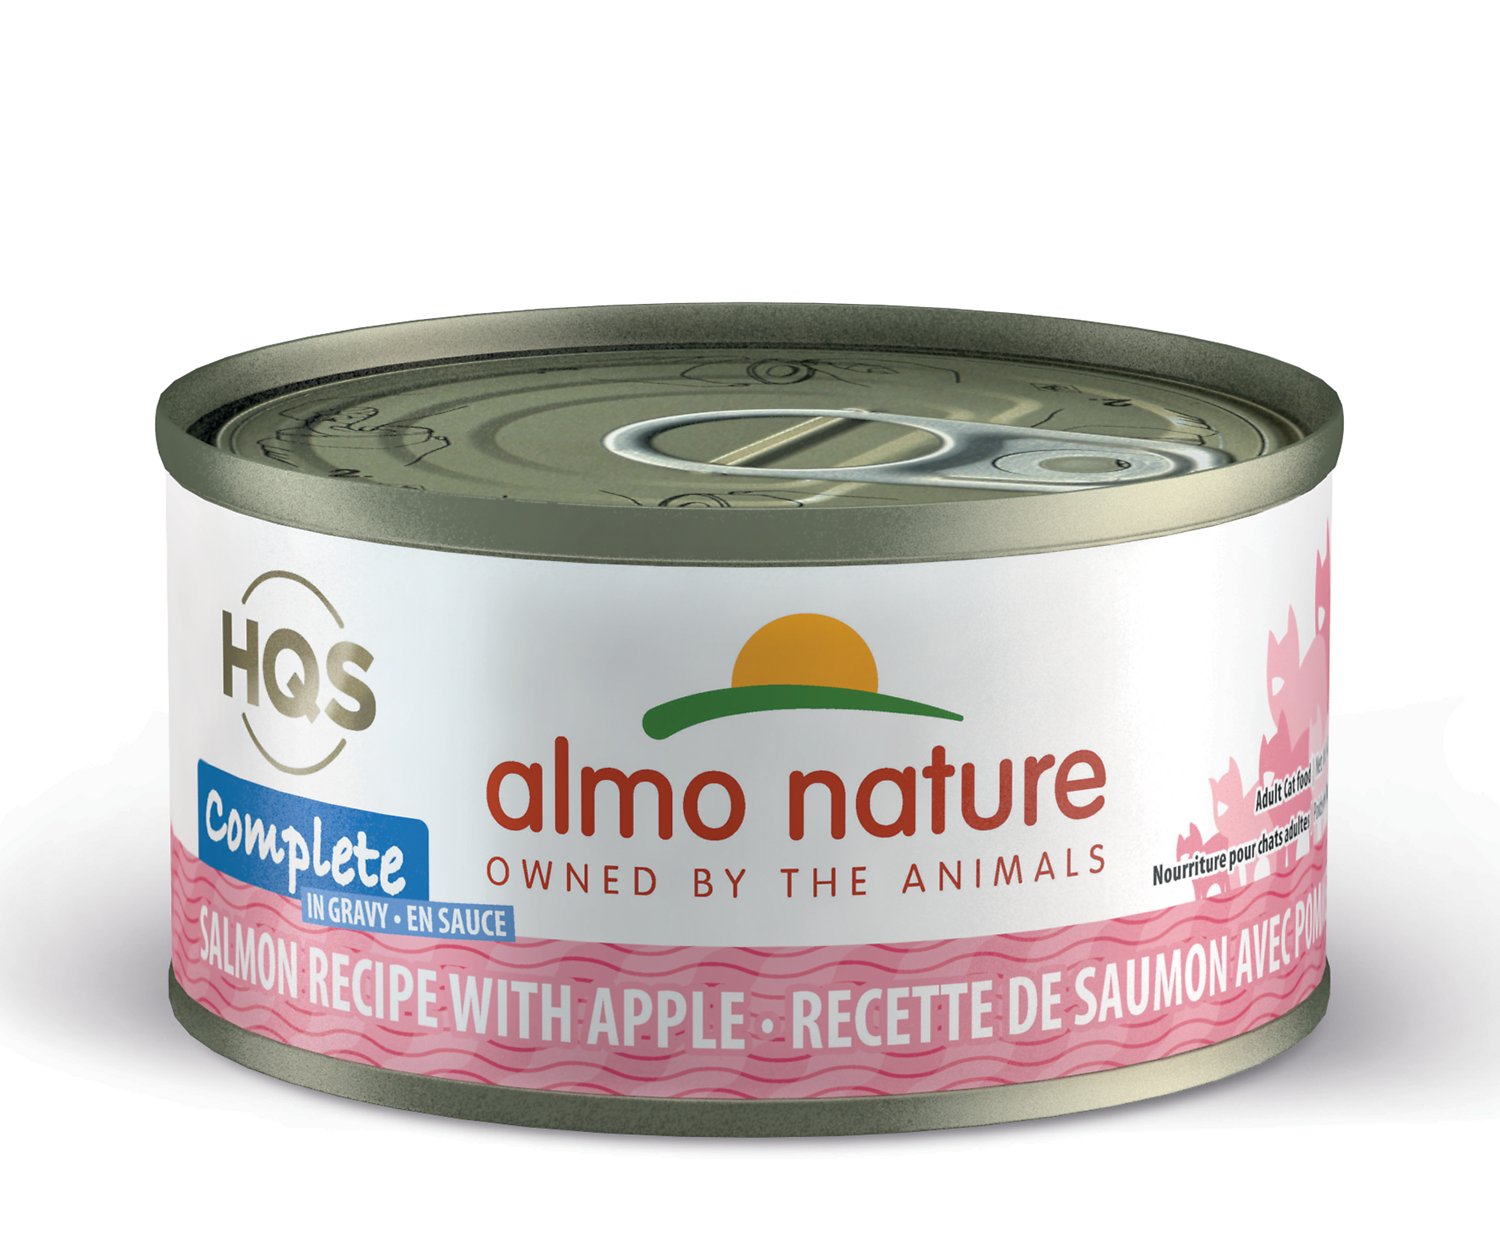 Almo Nature | Pet Food Stores Near Me Toronto | ARMOR THE POOCH |